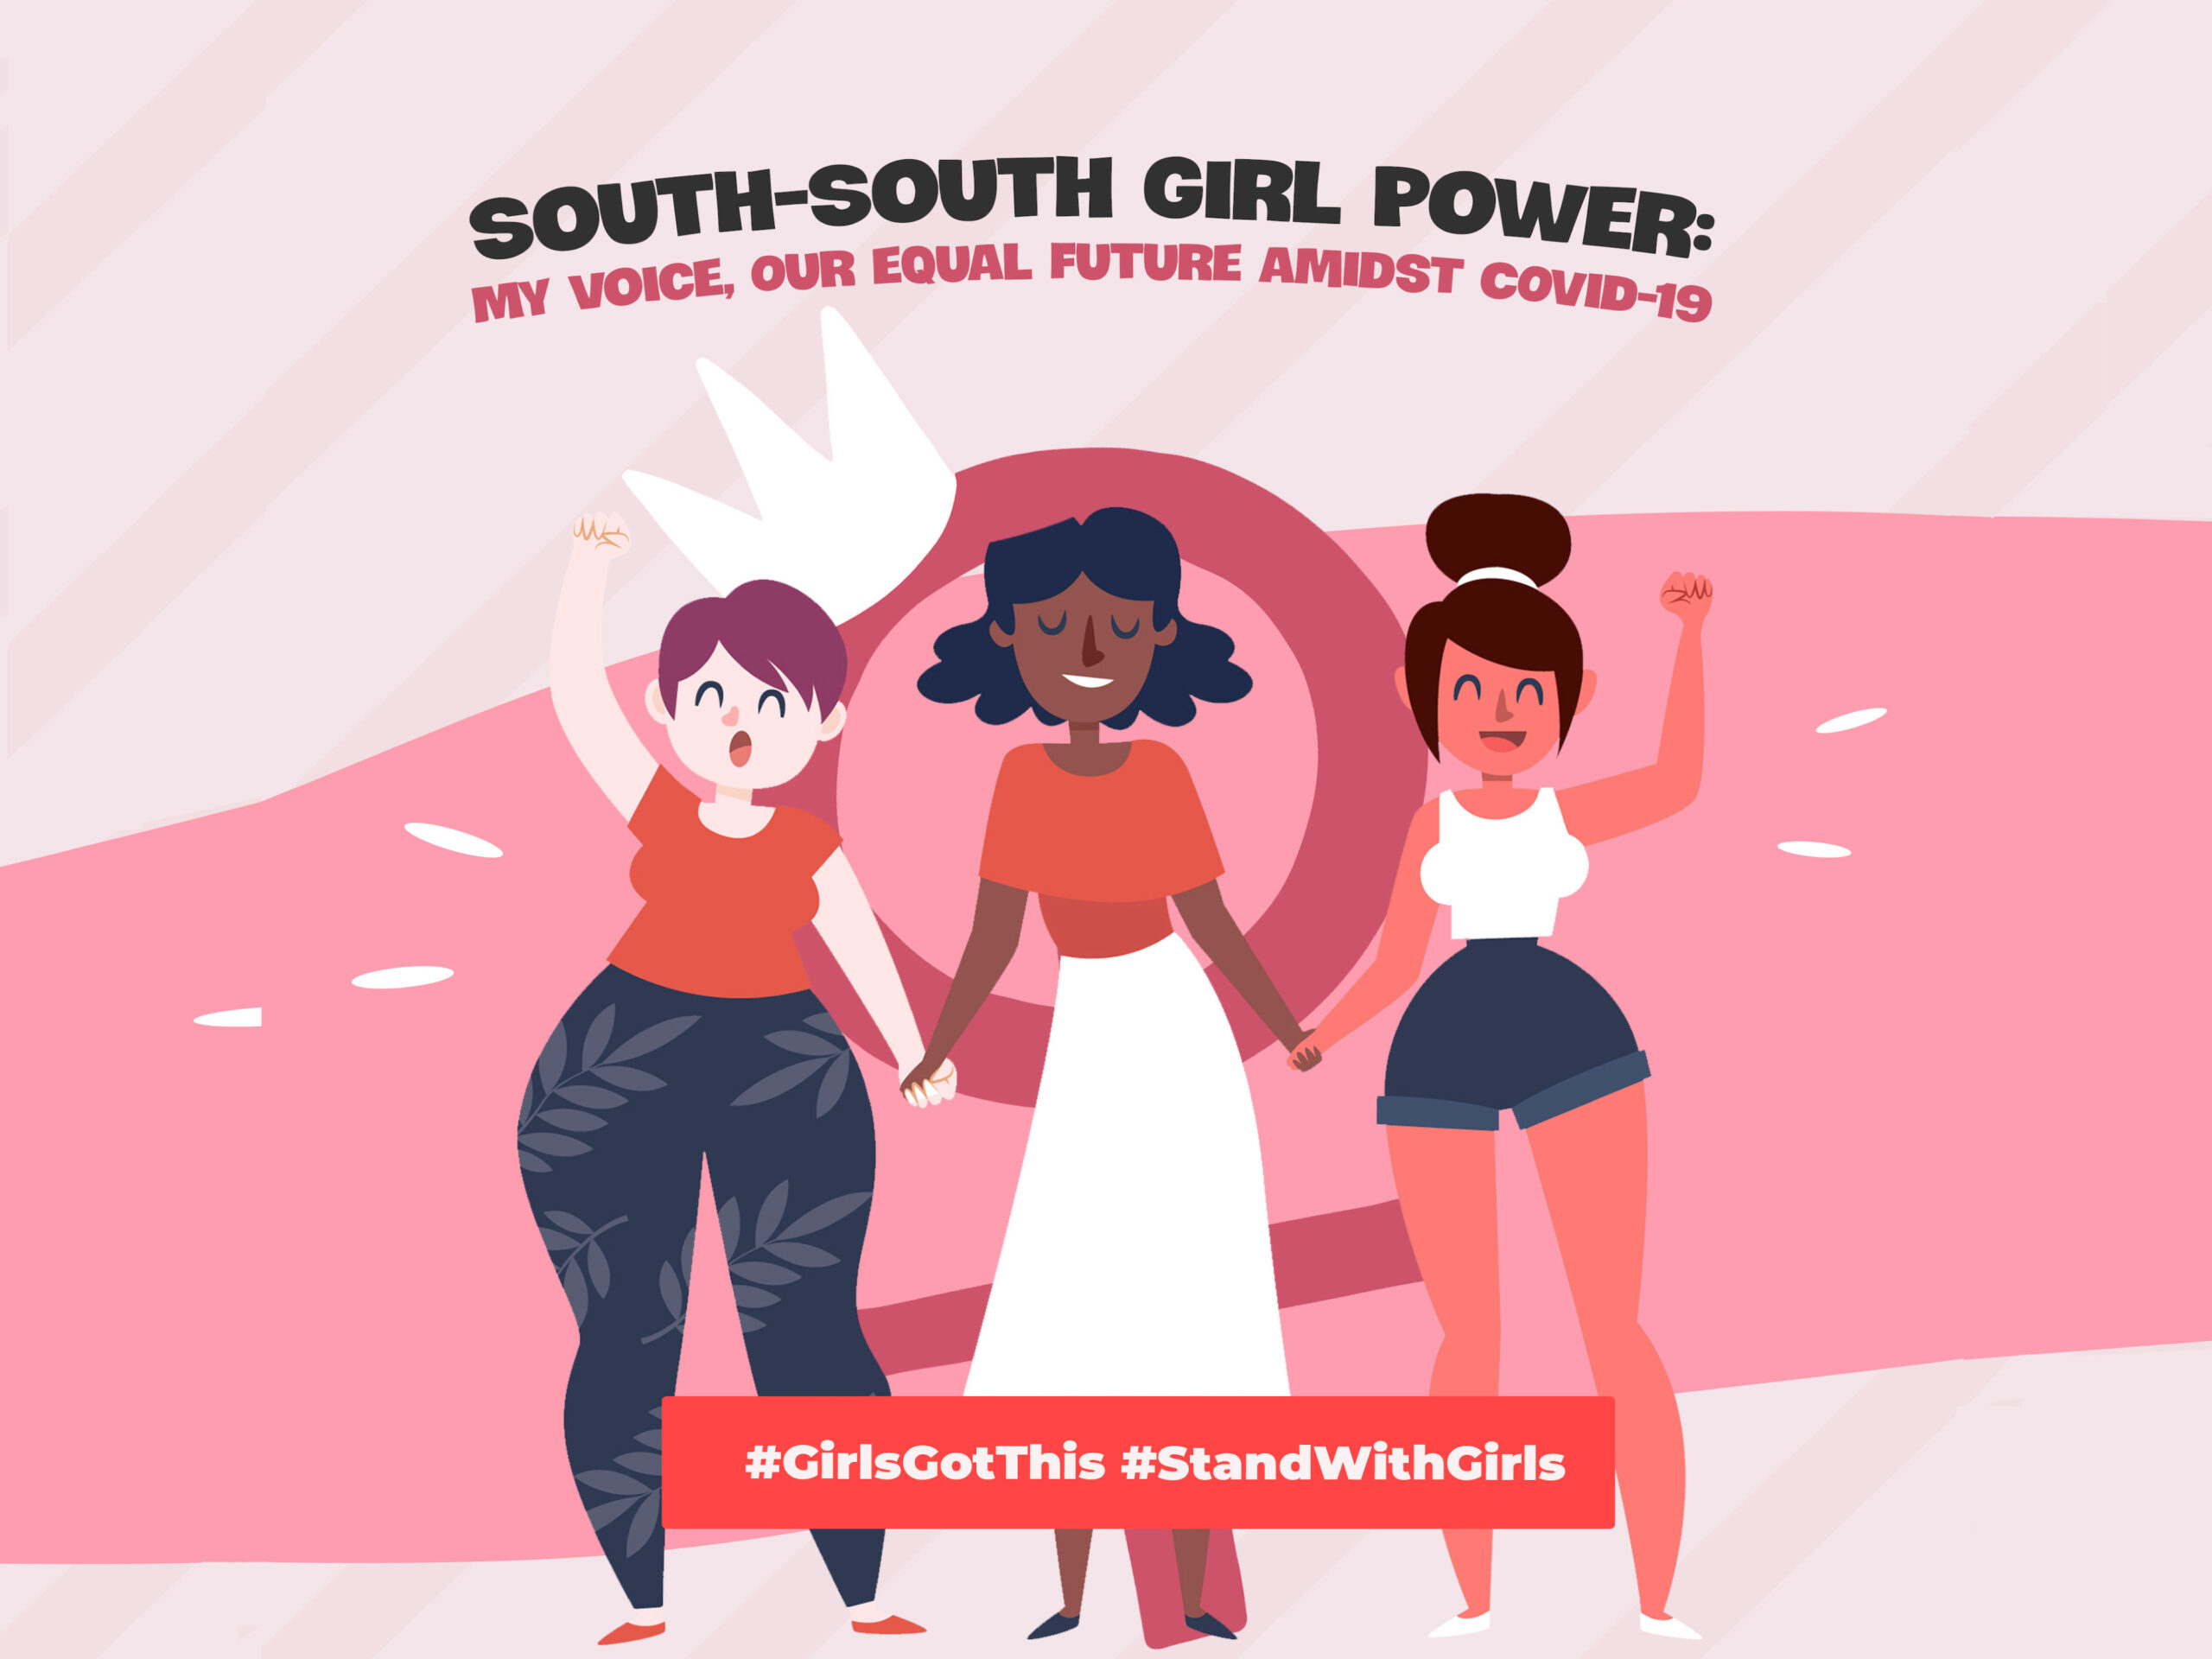 South-South Girl Power: My Voice, Our Equal Future Amidst COVID